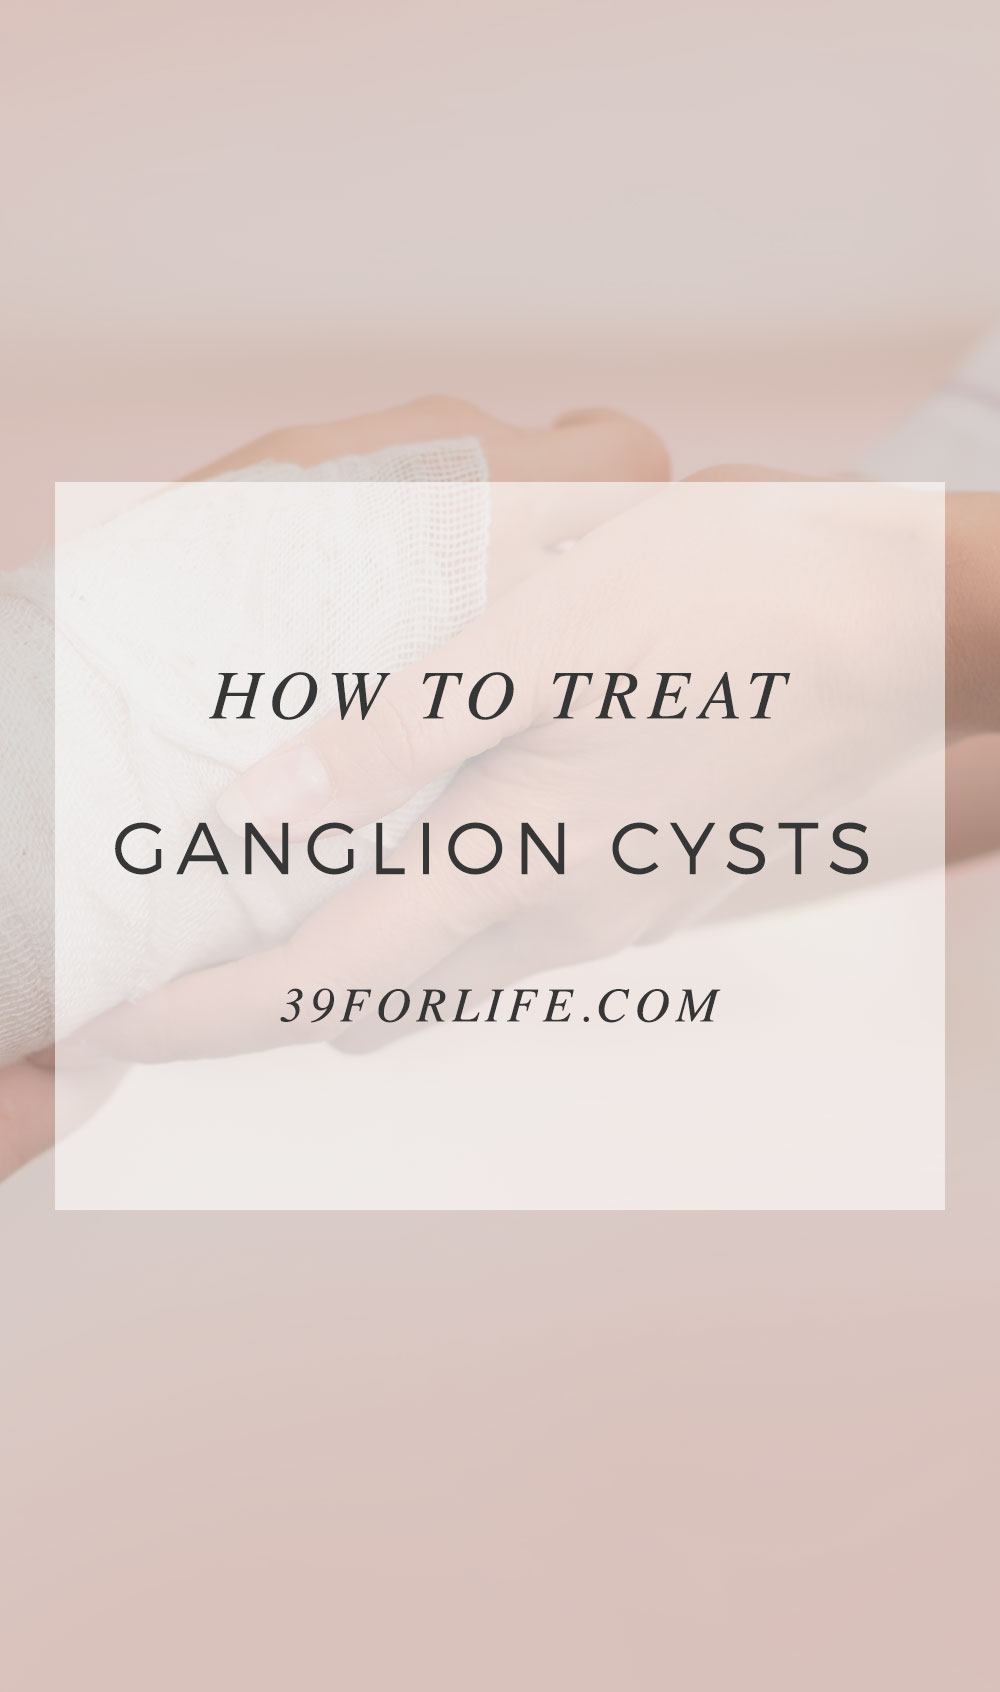 The bump on your wrist that won't go away might be a ganglion cyst. Recognize the signs and know the treatments for a ganglion cyst.